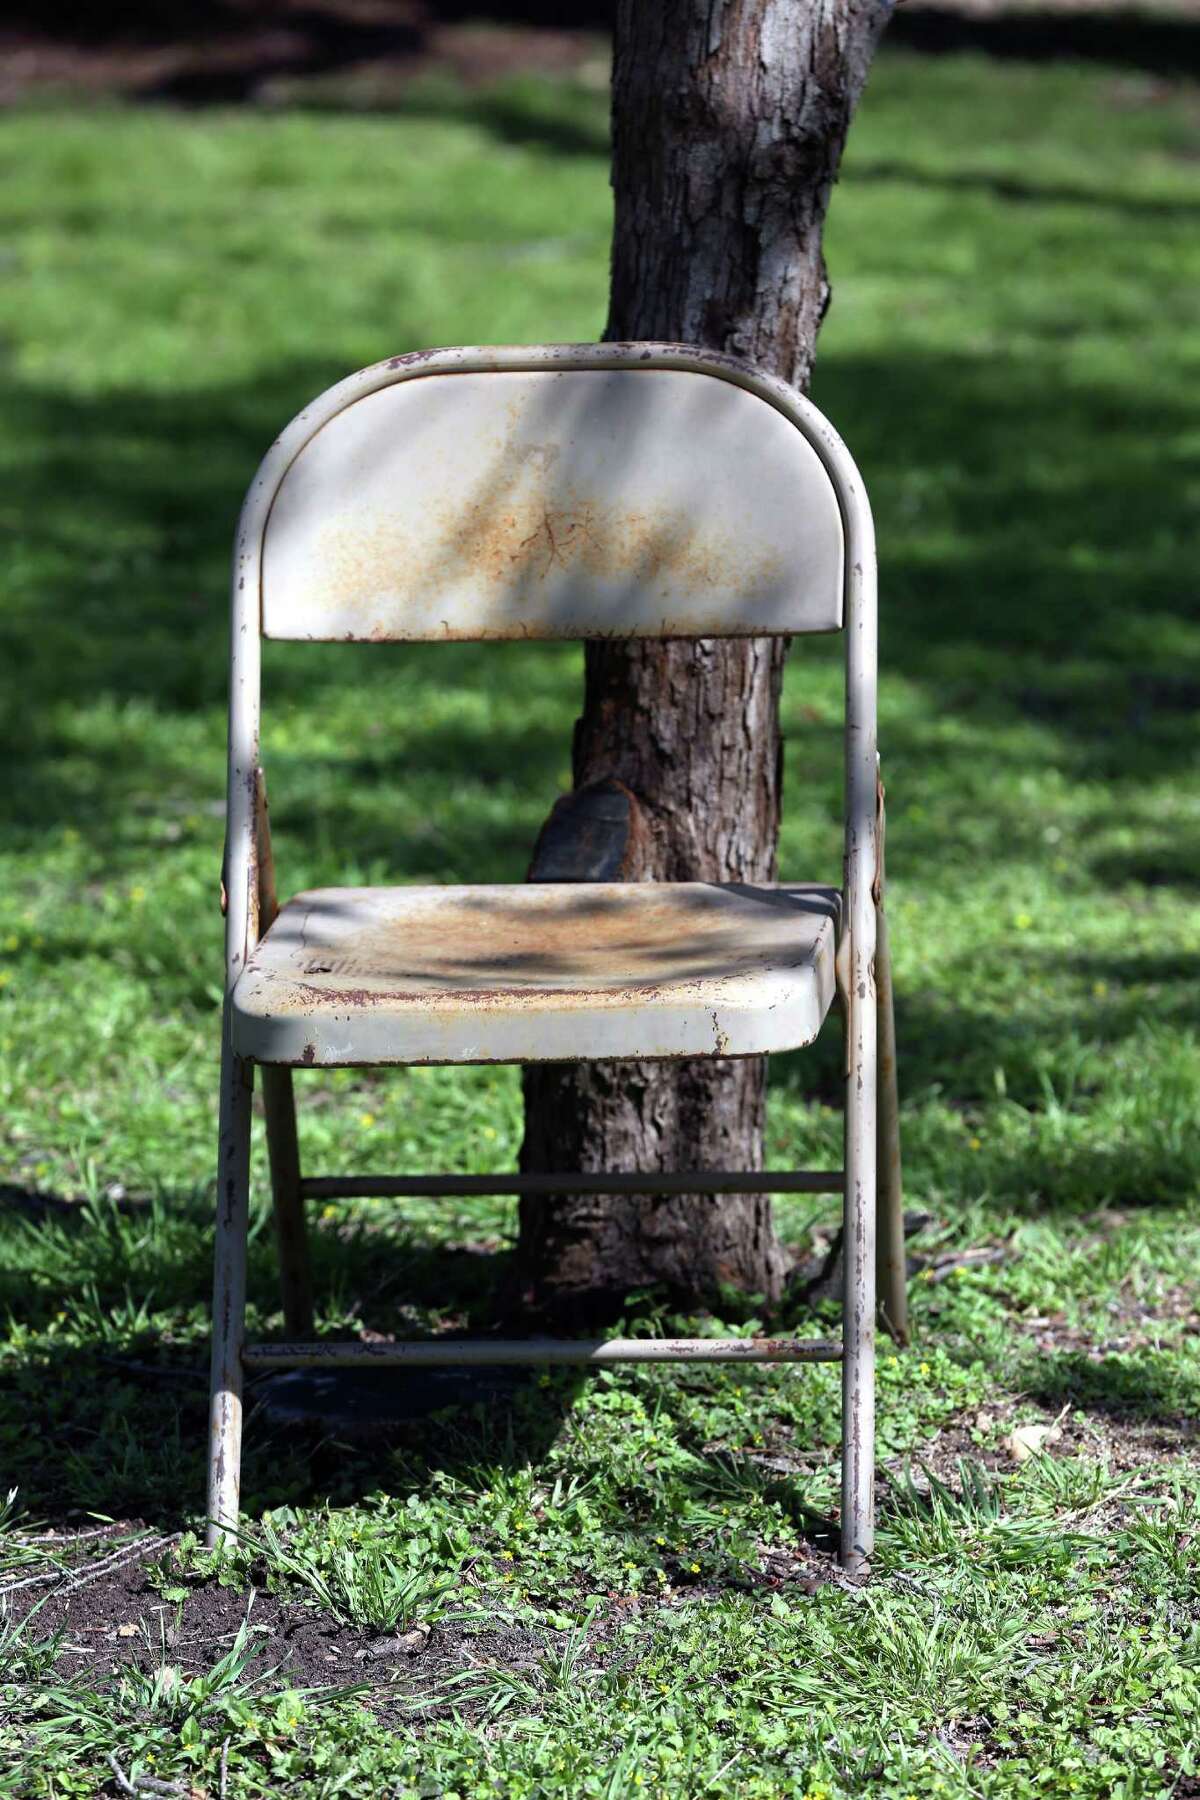 A chair marks a spot Thursday, March 24, 2016 in Brackenridge Park where someone is reserving space for their Easter festivities. Chairs of all kinds begin appearing chained, roped, and simply leaning on just about every possible object in the park as much as a week before Easter as families try to reserve good spots in the park.